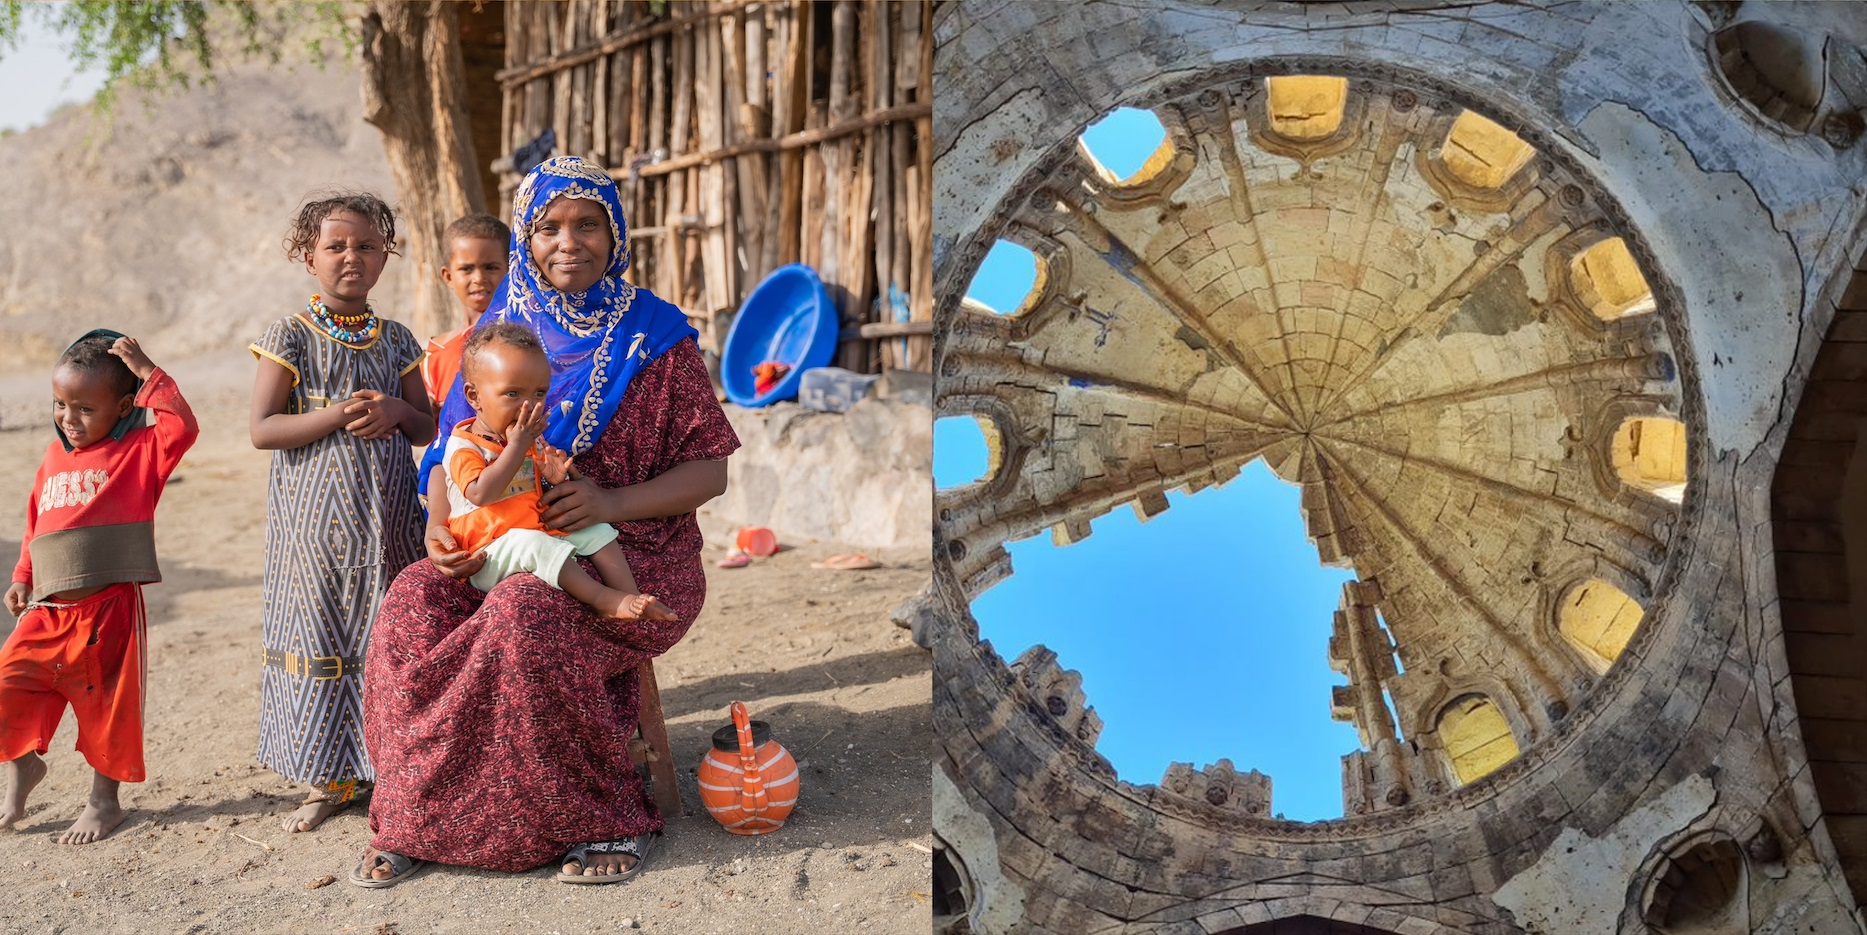 Photo of a family in Ethiopia next to an image of a roof dome in a building